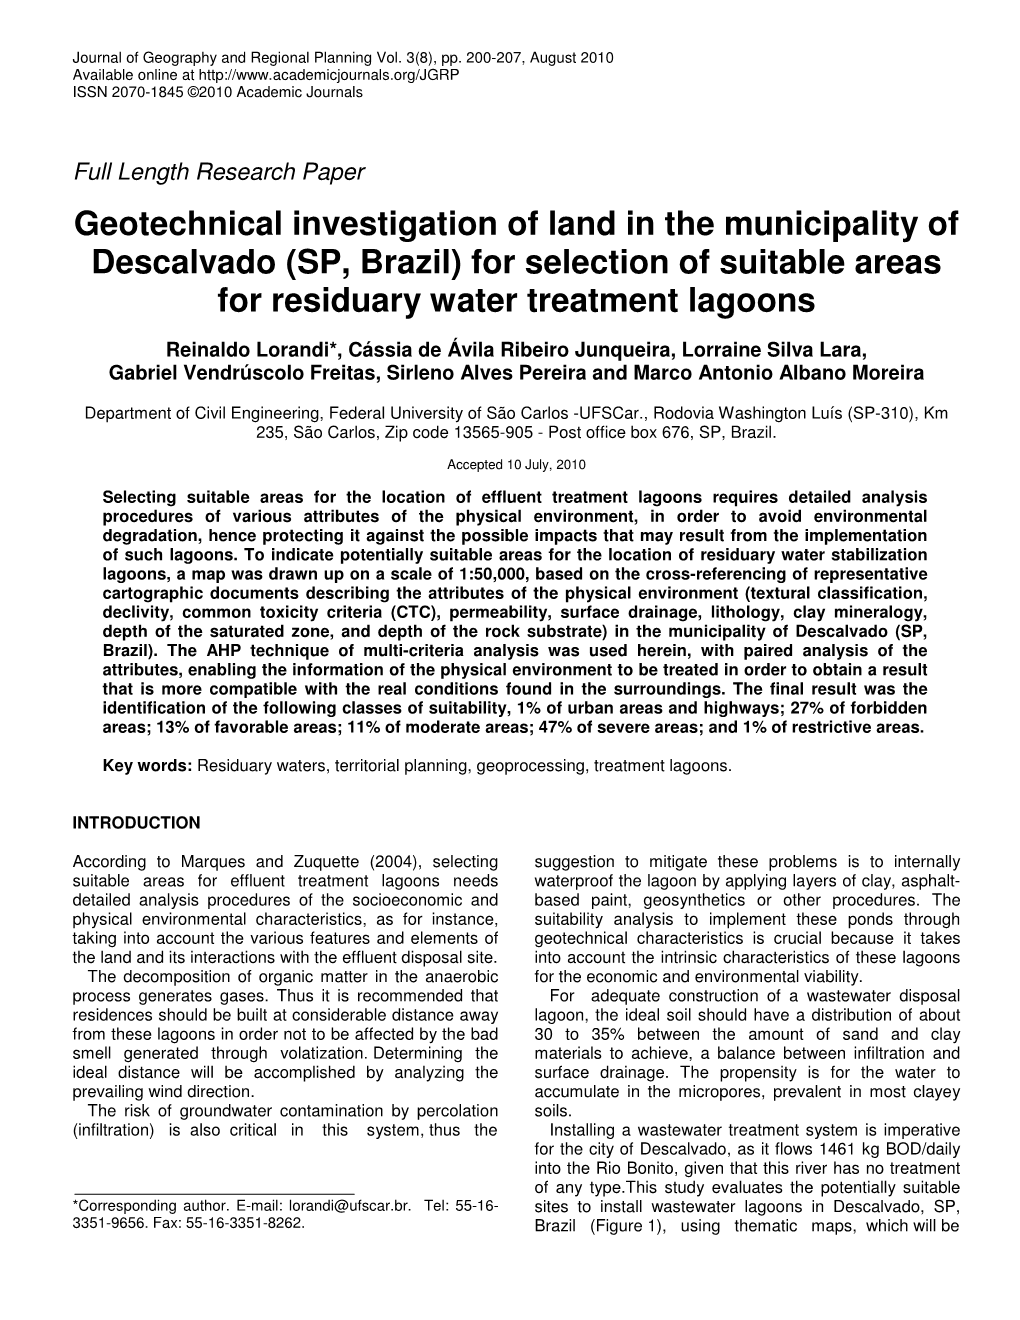 Geotechnical Investigation of Land in the Municipality of Descalvado (SP, Brazil) for Selection of Suitable Areas for Residuary Water Treatment Lagoons